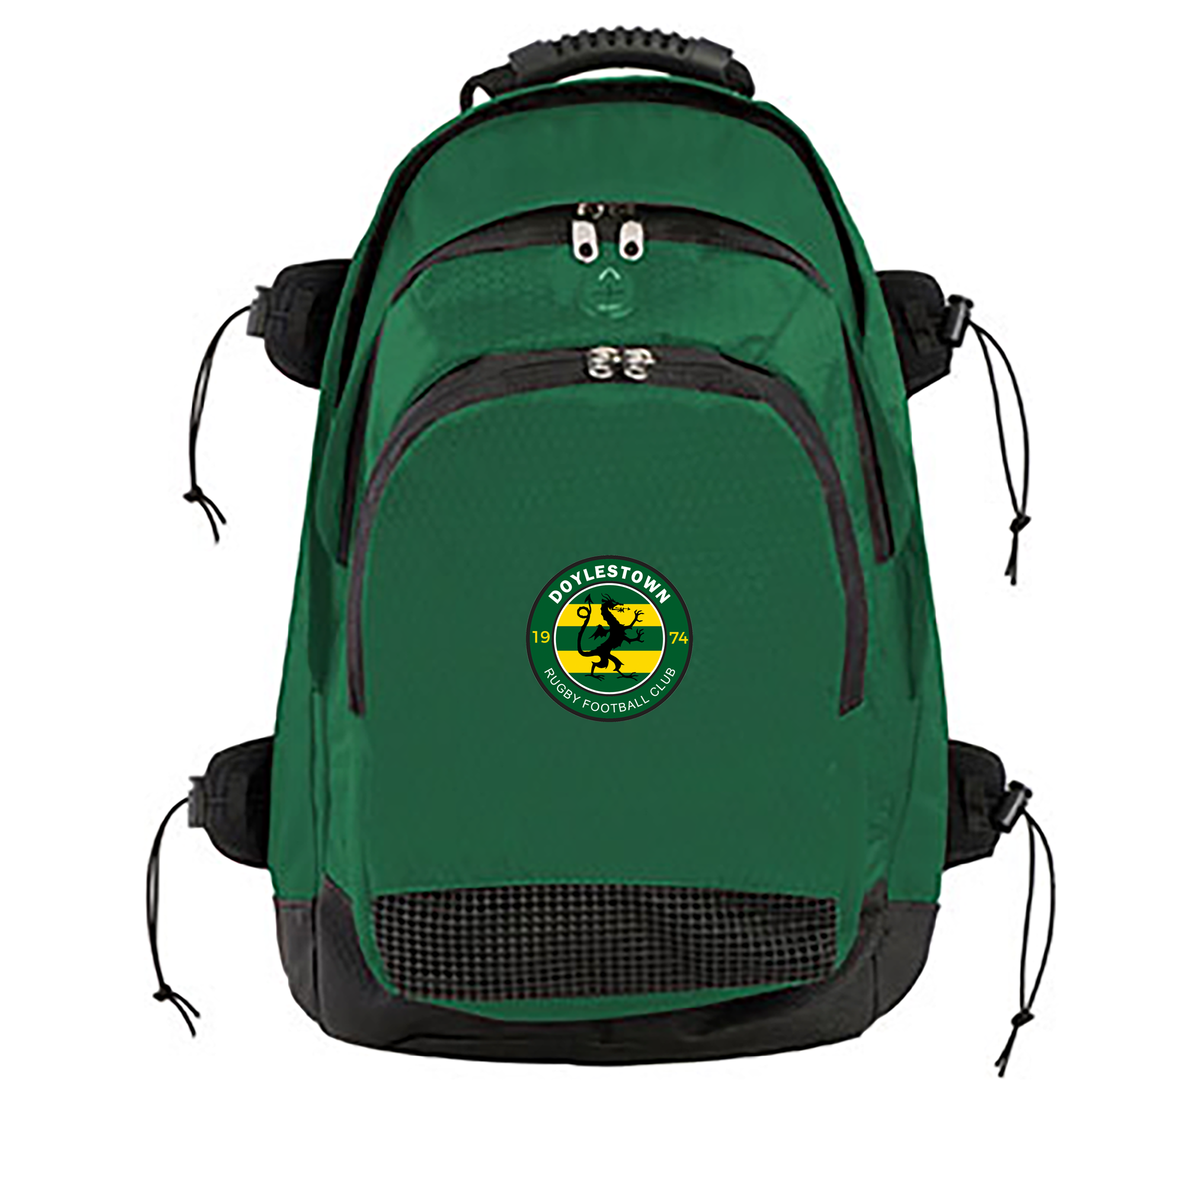 Doylestown Rugby Football Club Deluxe Sports Backpack